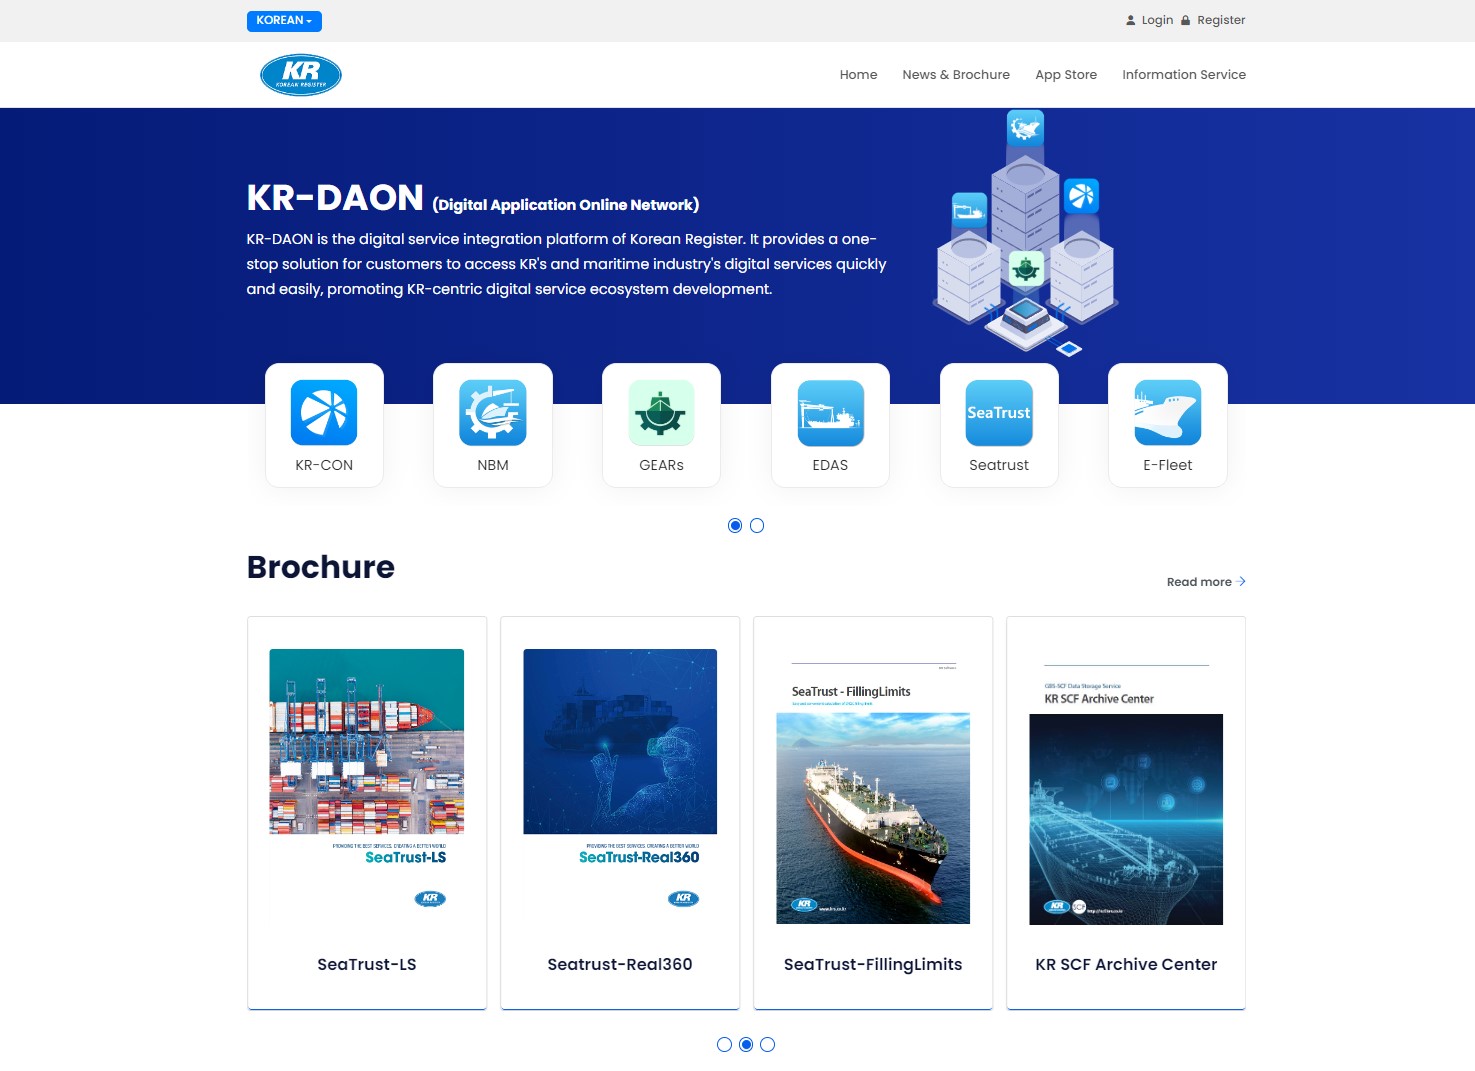 KR unveils new digital service platforms, KR-DAON and Nexawave, in conjunction with the launch of it